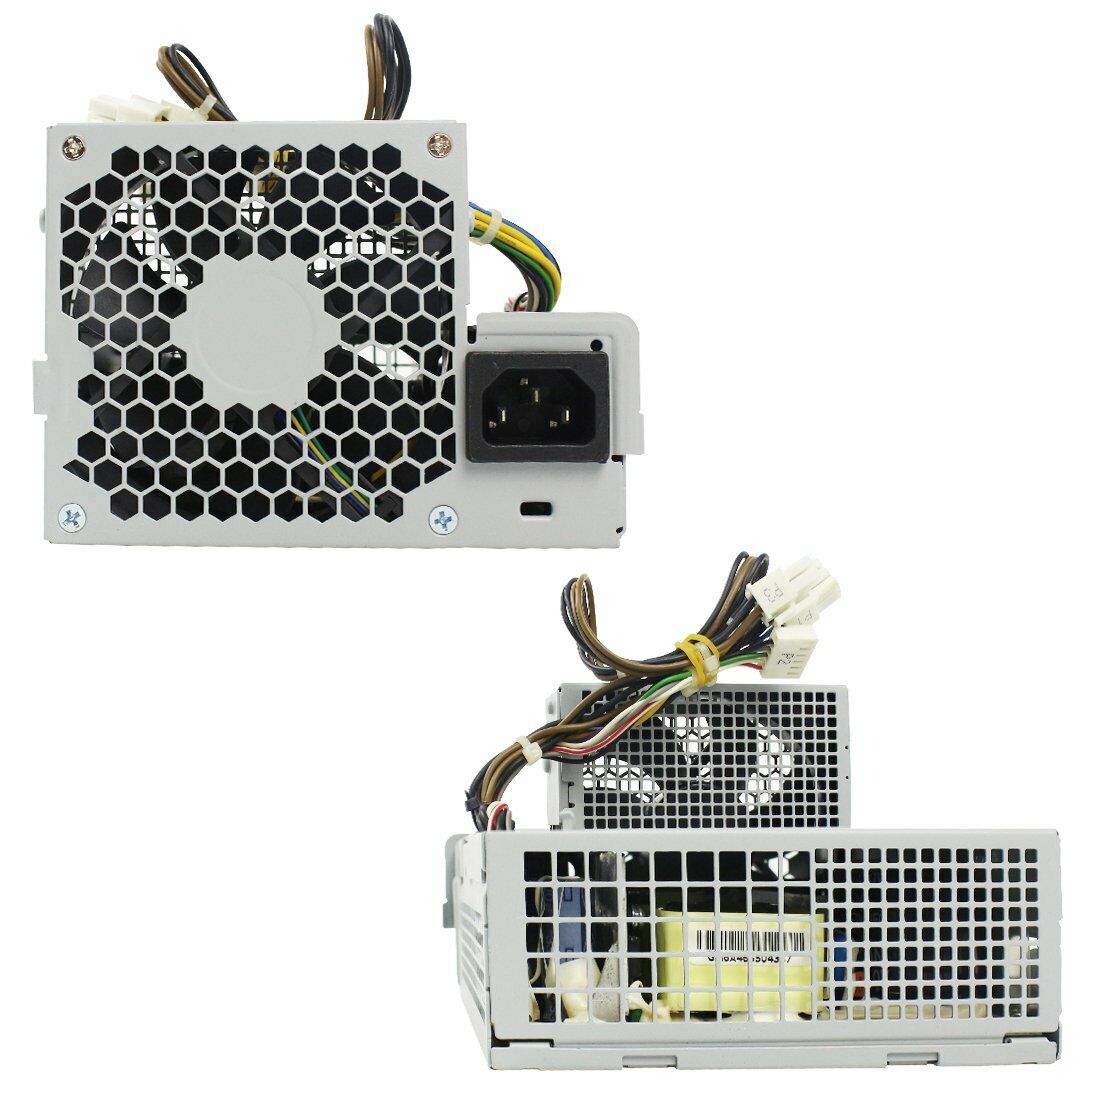 New for HP Power Supply 503375-001 240W Pro 6000 6005 6200 Elite 8000 8100 8200